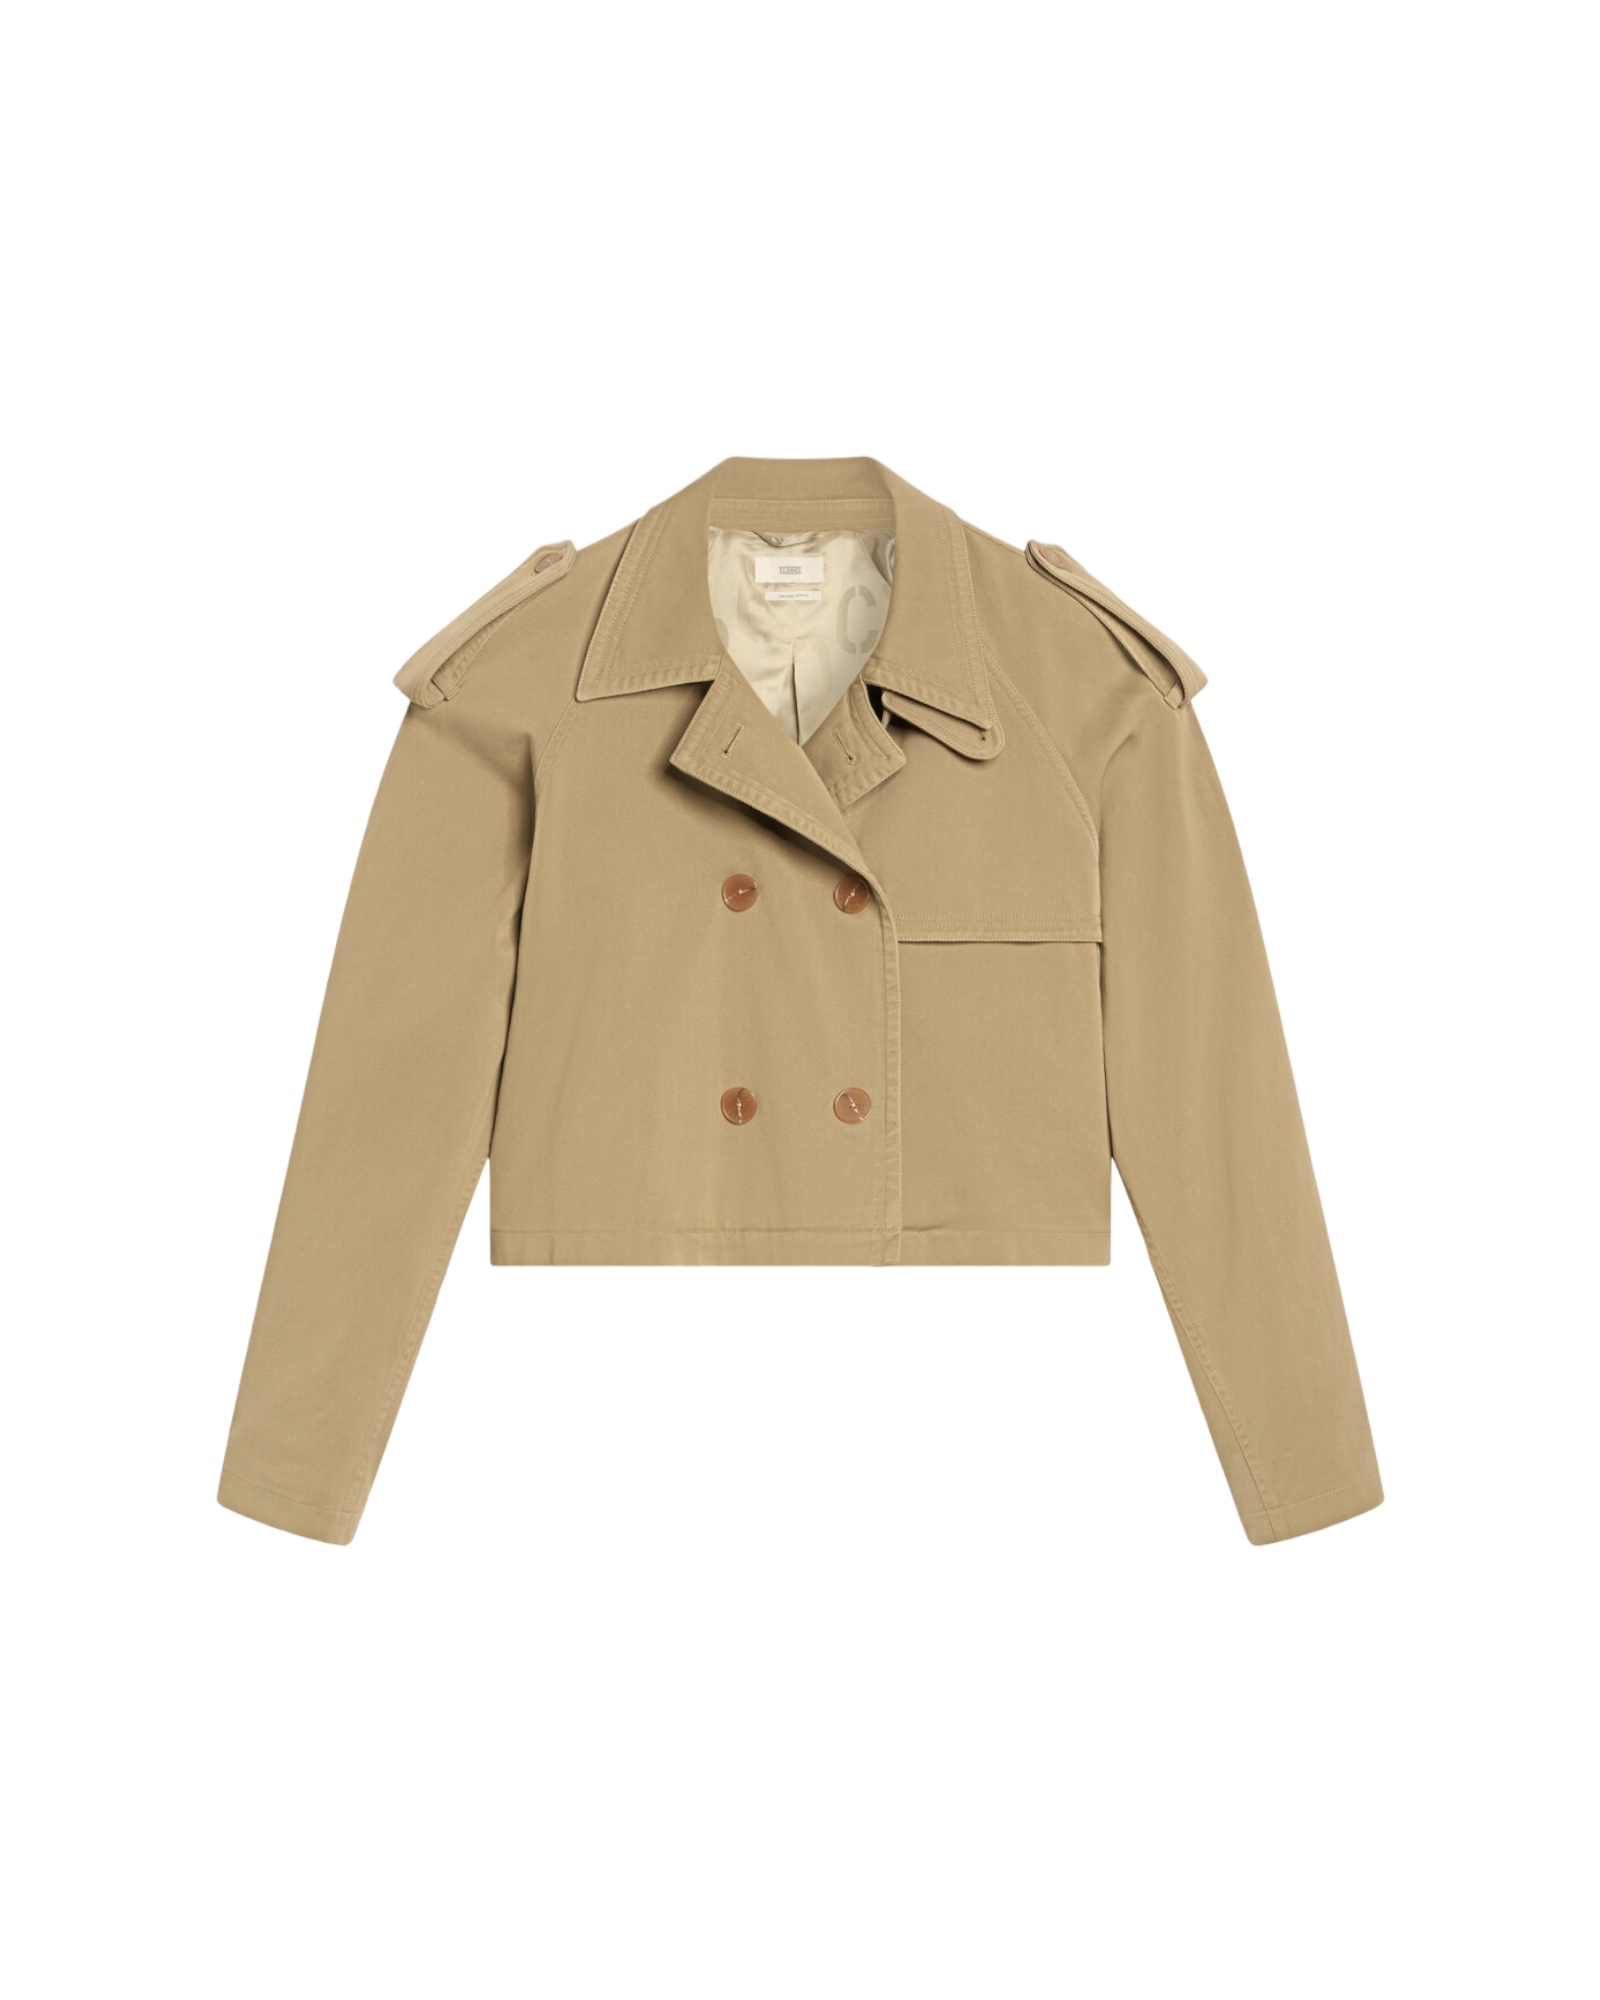 Jacke cropped Trench, Closed, C97133-52M-30-916, Jacke, Trench, Closed